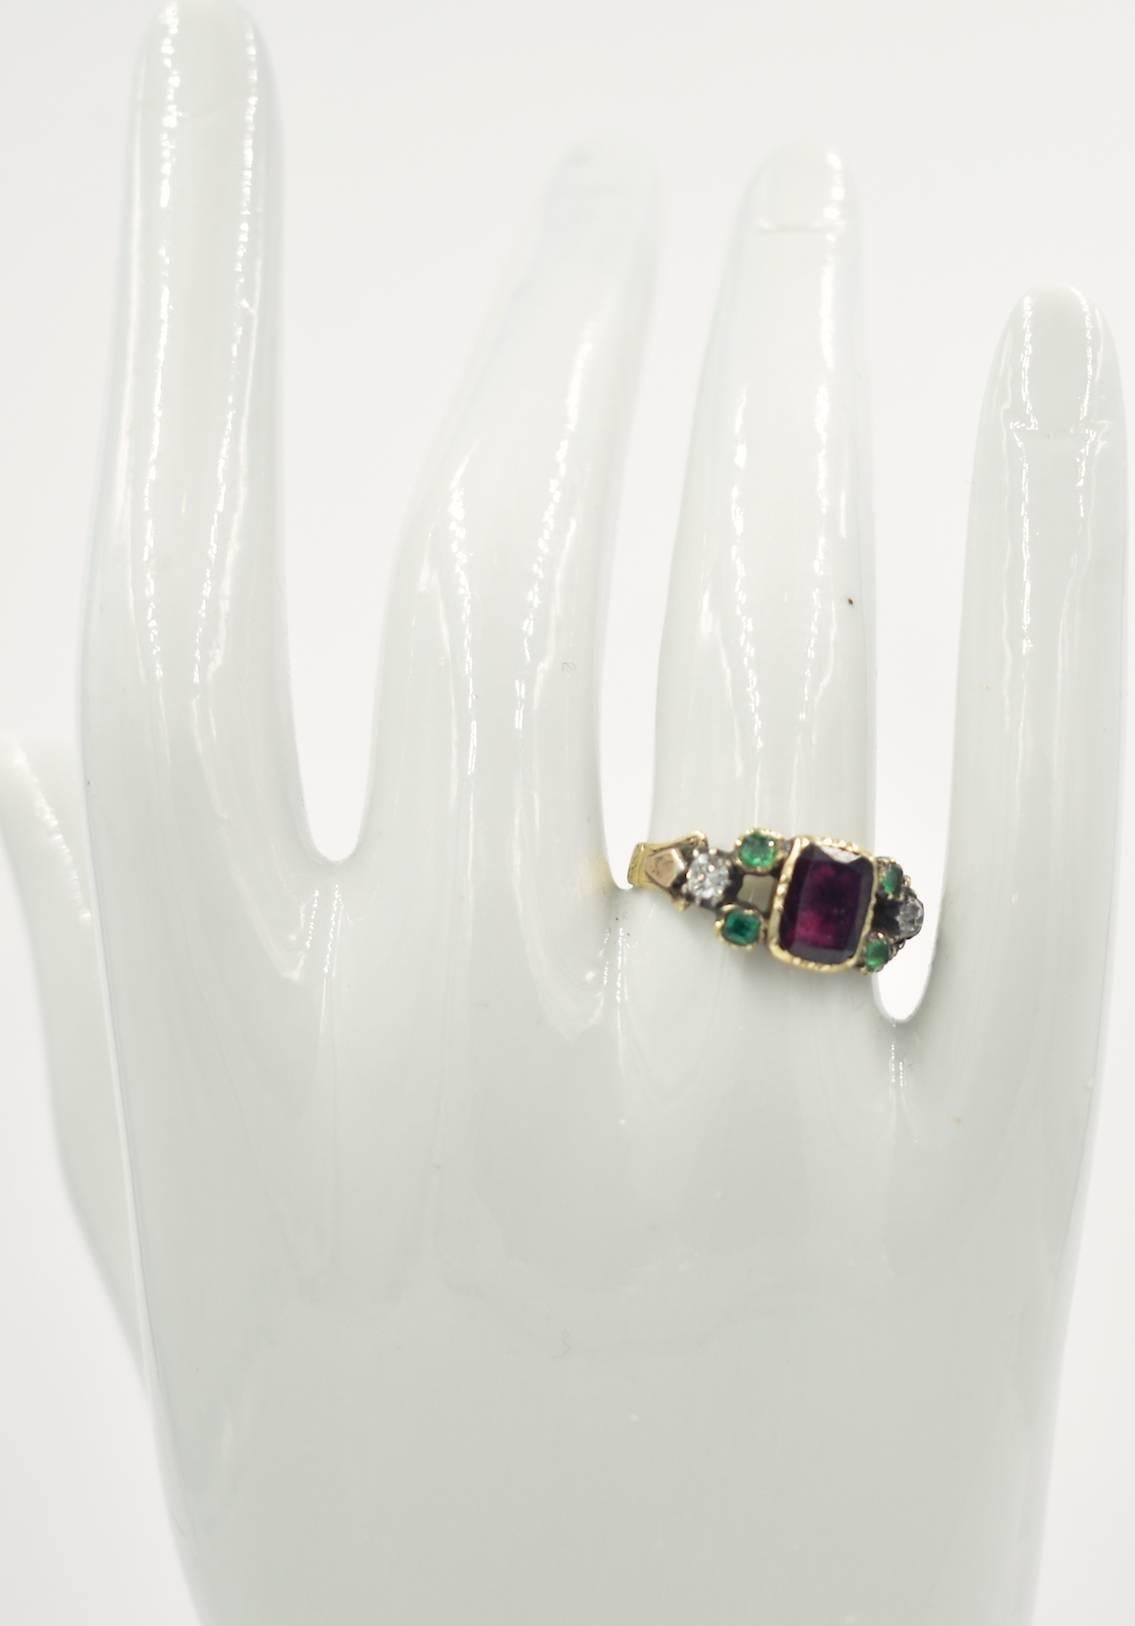 Women's Antique Garnet, Emerald and Ruby Ring